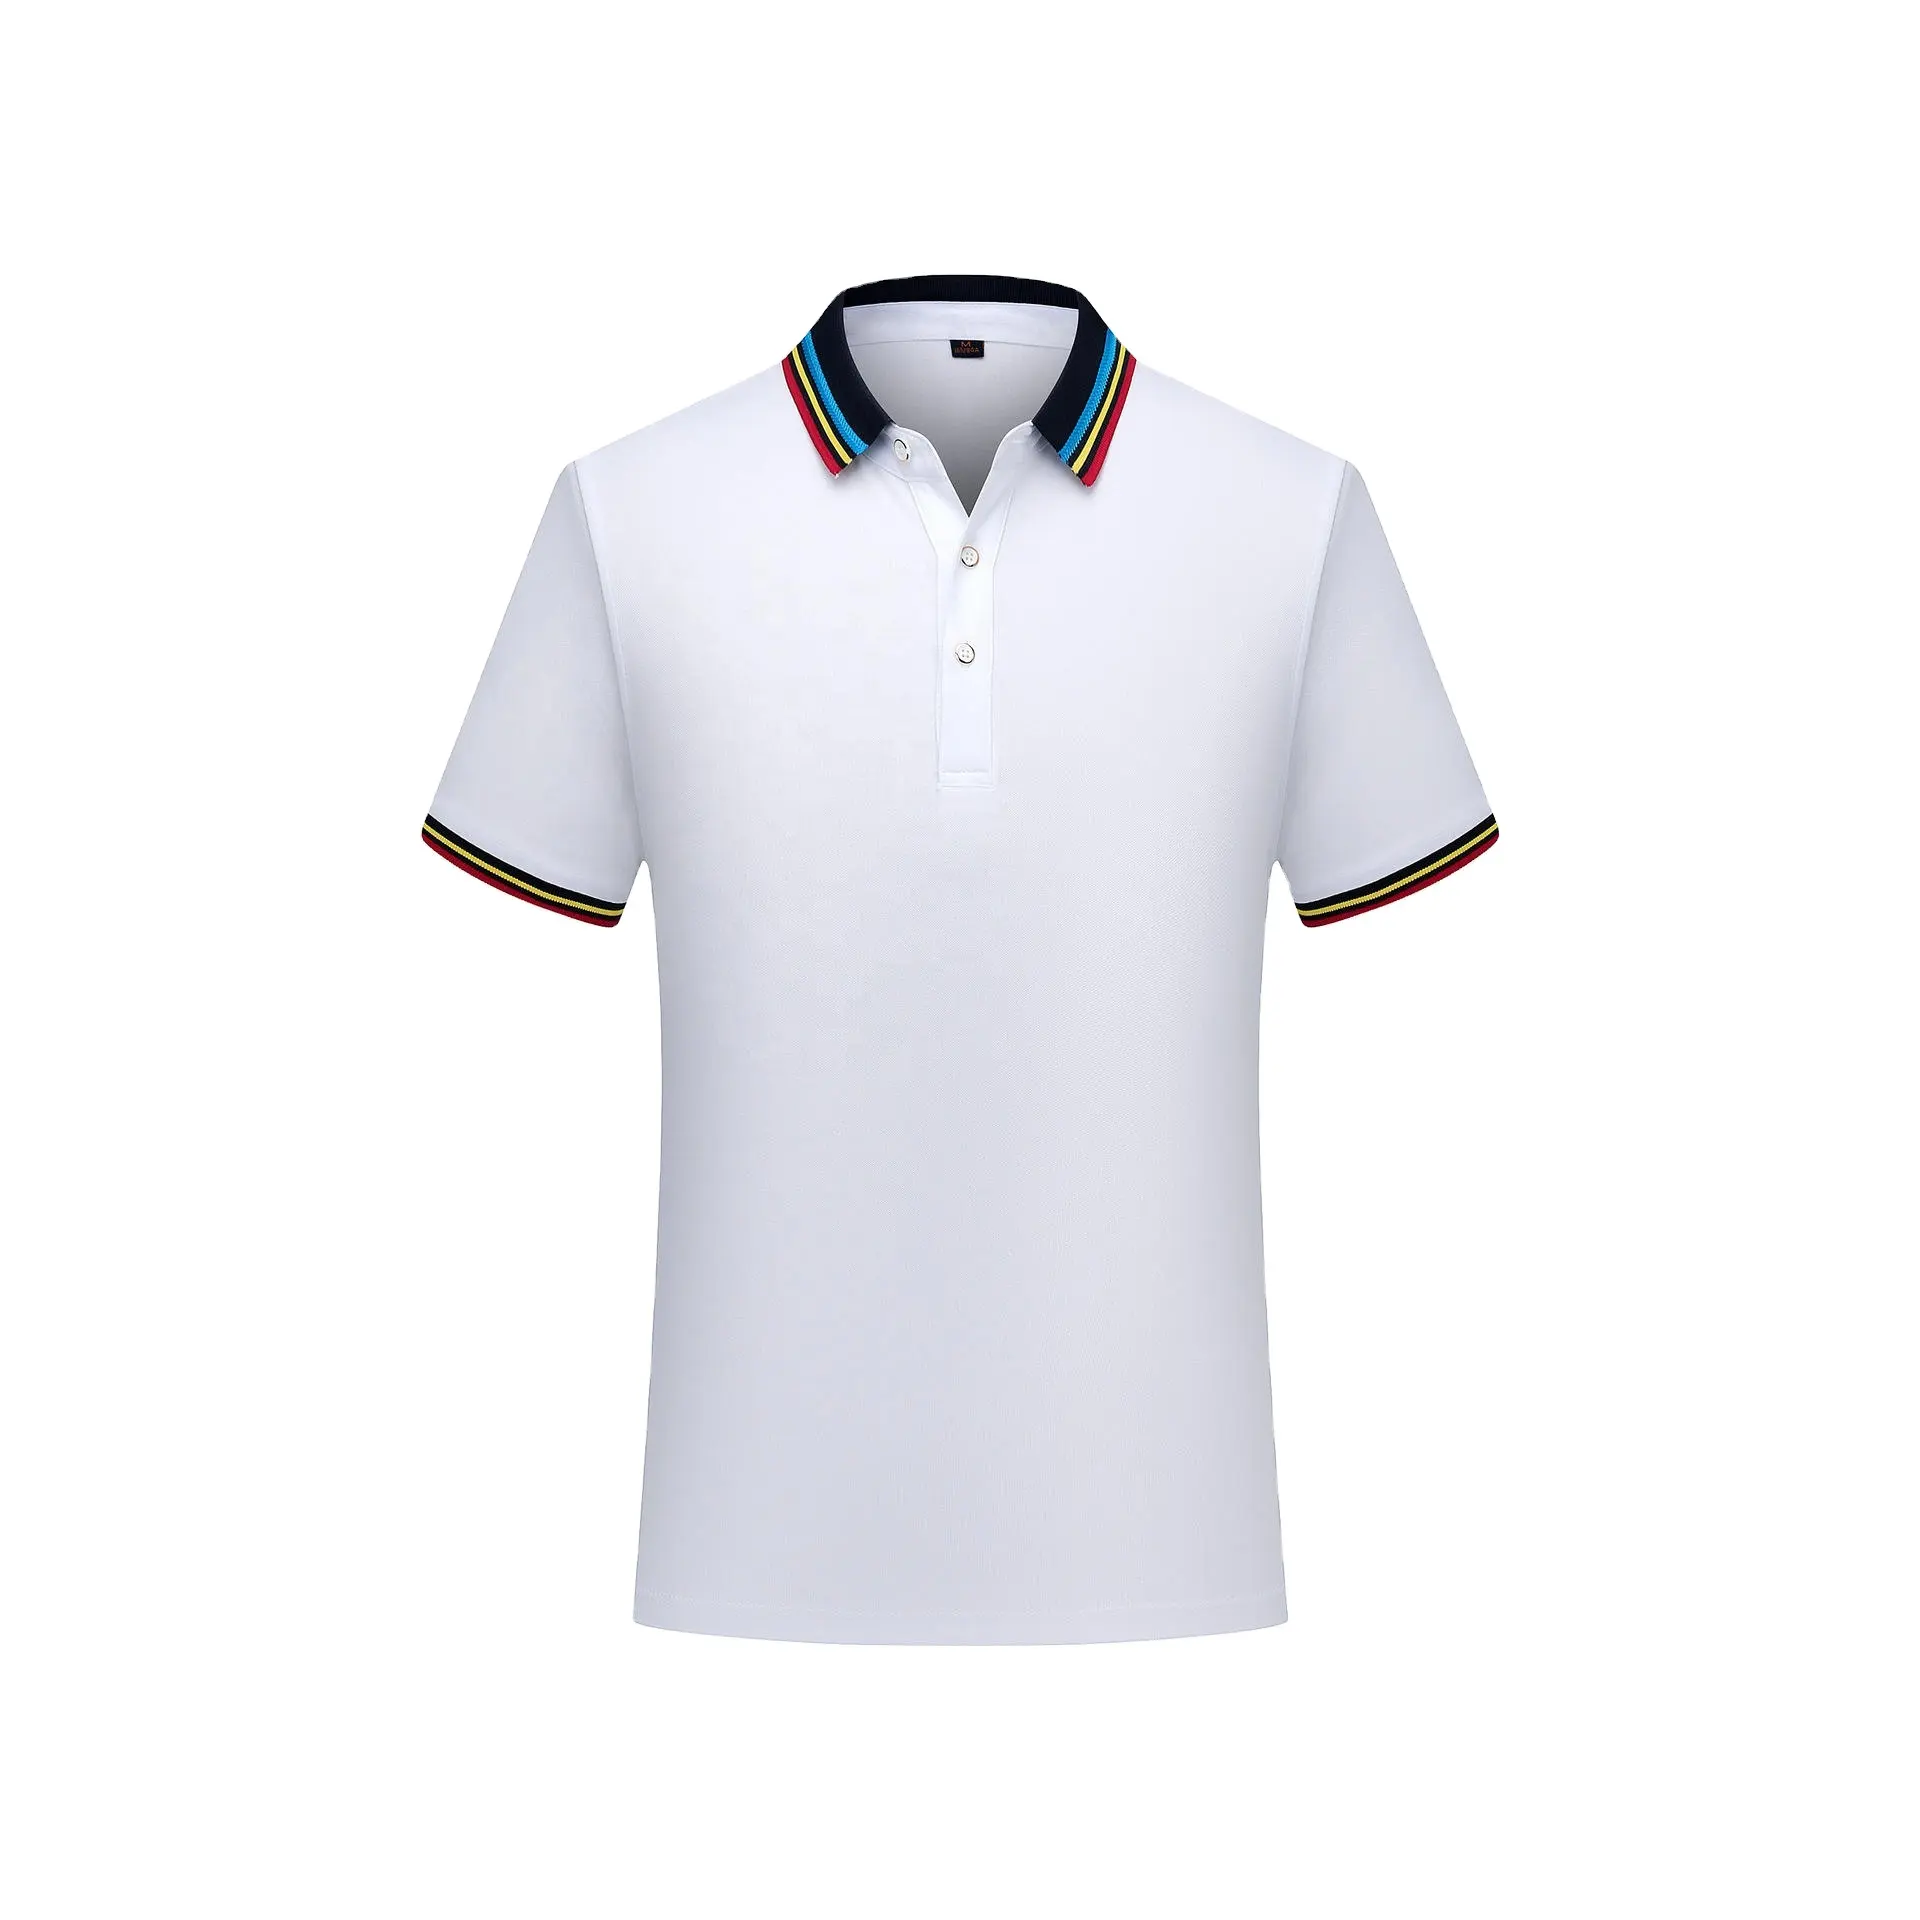 Wholesale Polo T Shirt for Men Custom Made High Quality Polo Shirt with Custom Colors Size and Label Cotton Polo Shirts